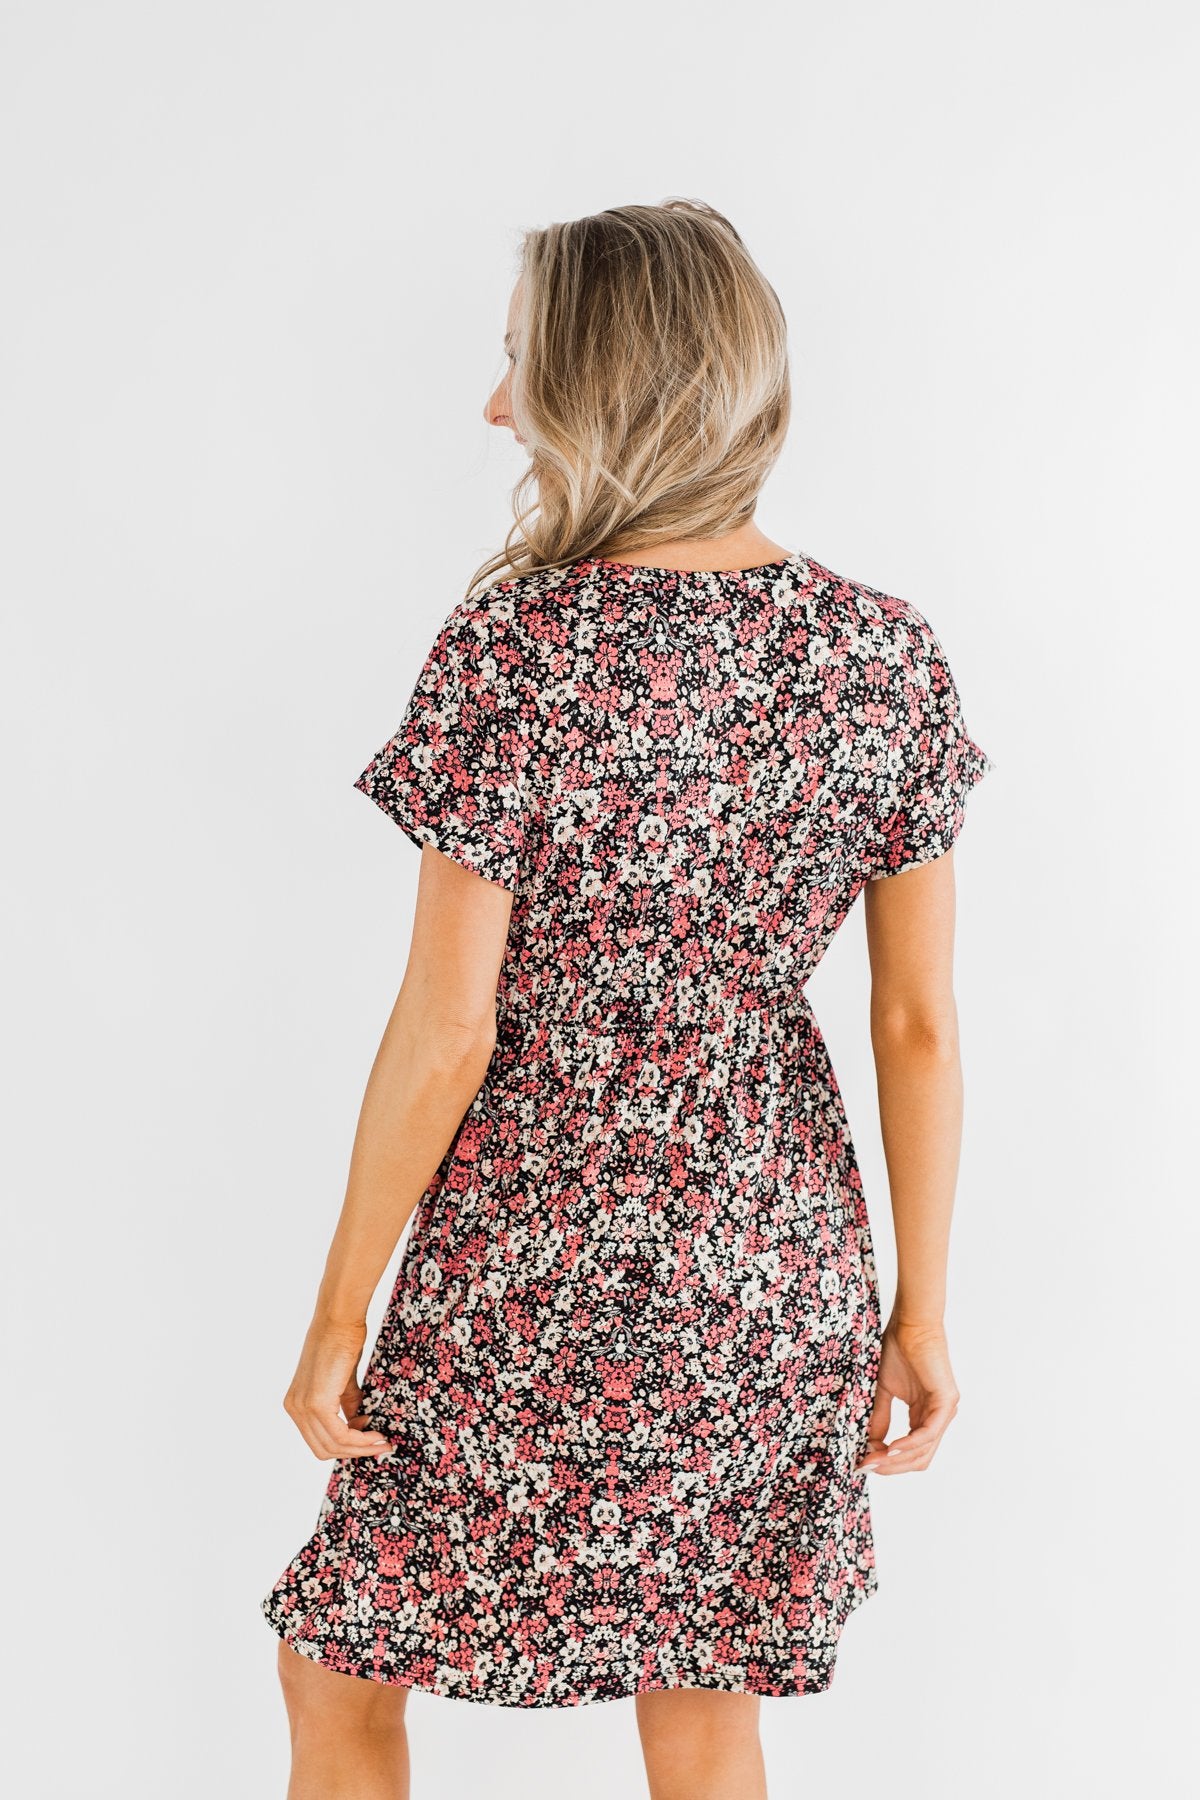 Just Say Yes Floral Button Dress- Black & Pink